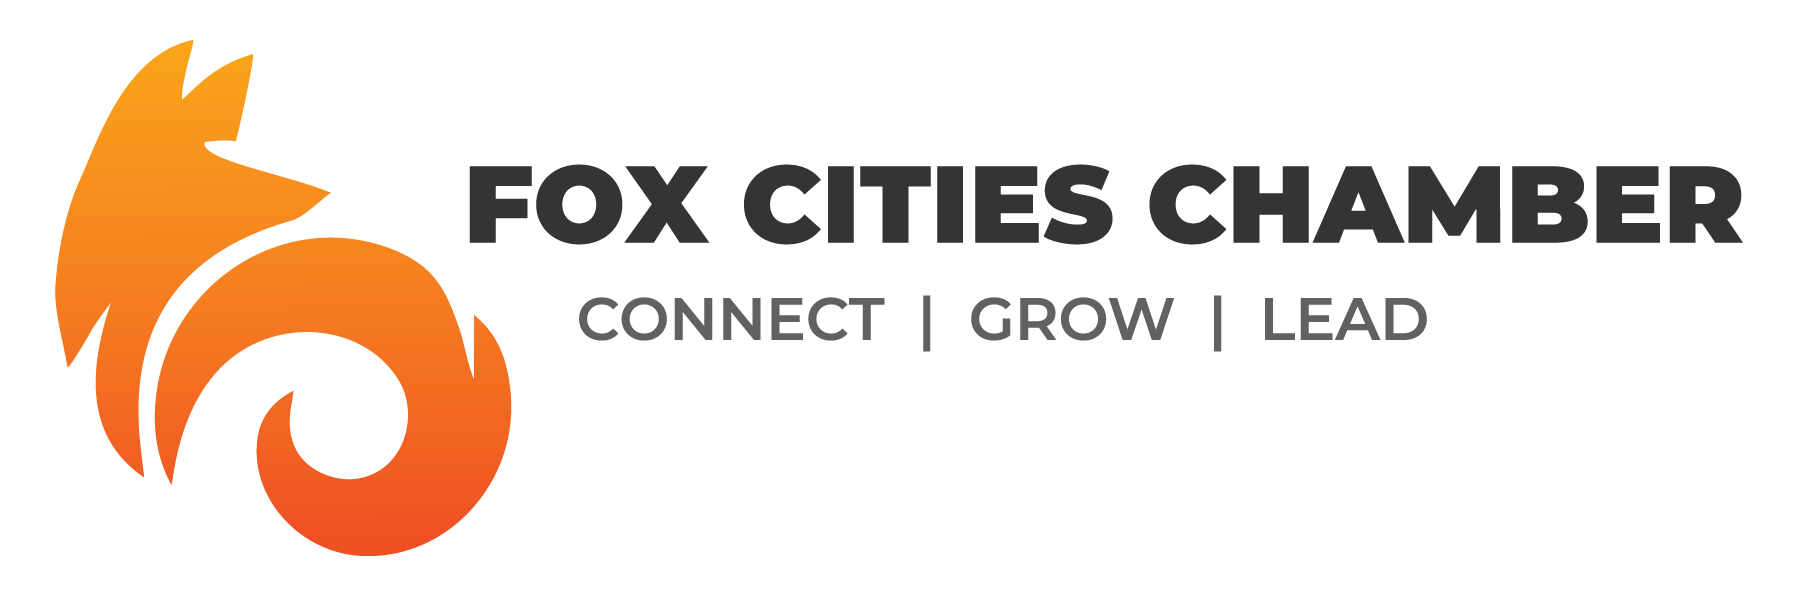 cropped Fox Cities Chamber Logo Horizontal Full Color 01